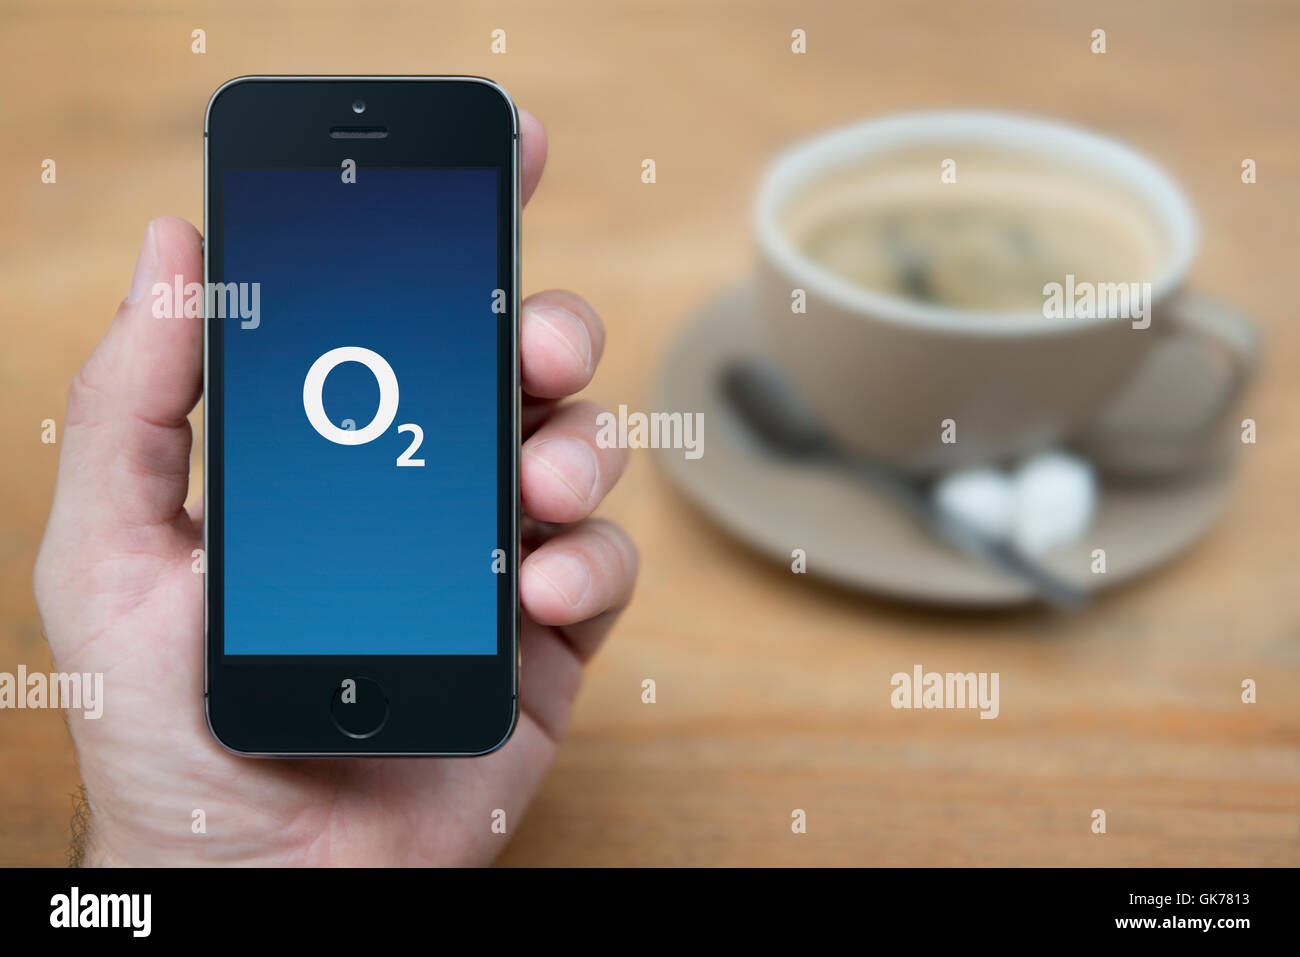 A man looks at his iPhone which displays the O2 logo, while sat with a cup of coffee (Editorial use only). Stock Photo